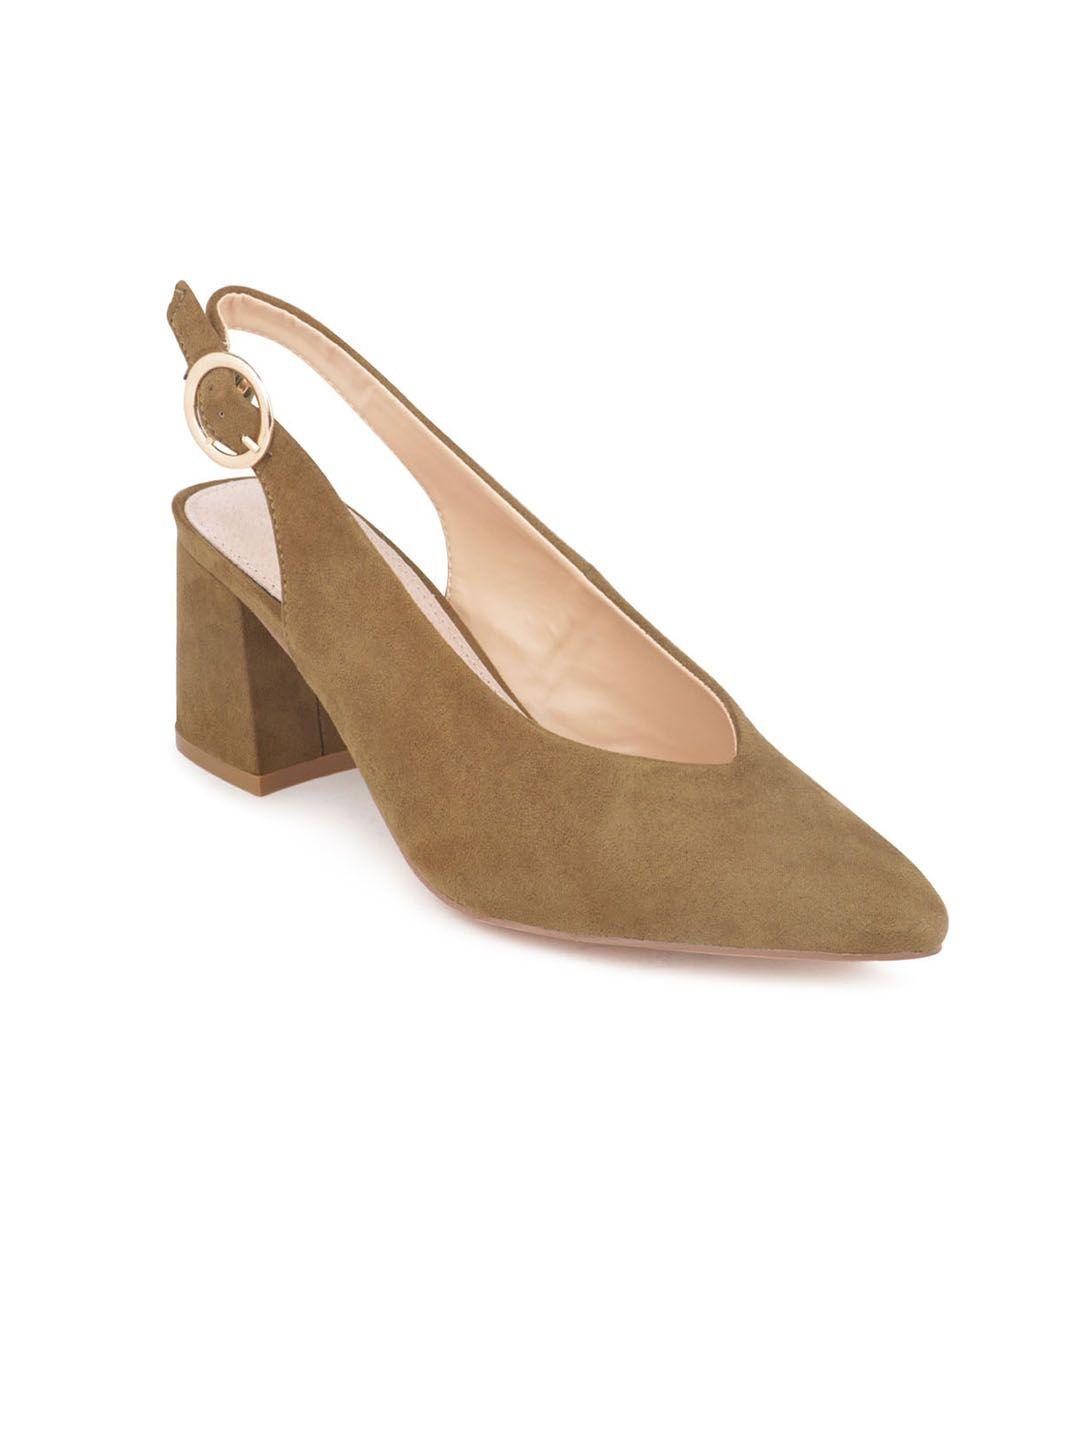 london rag women olive green solid suede pumps